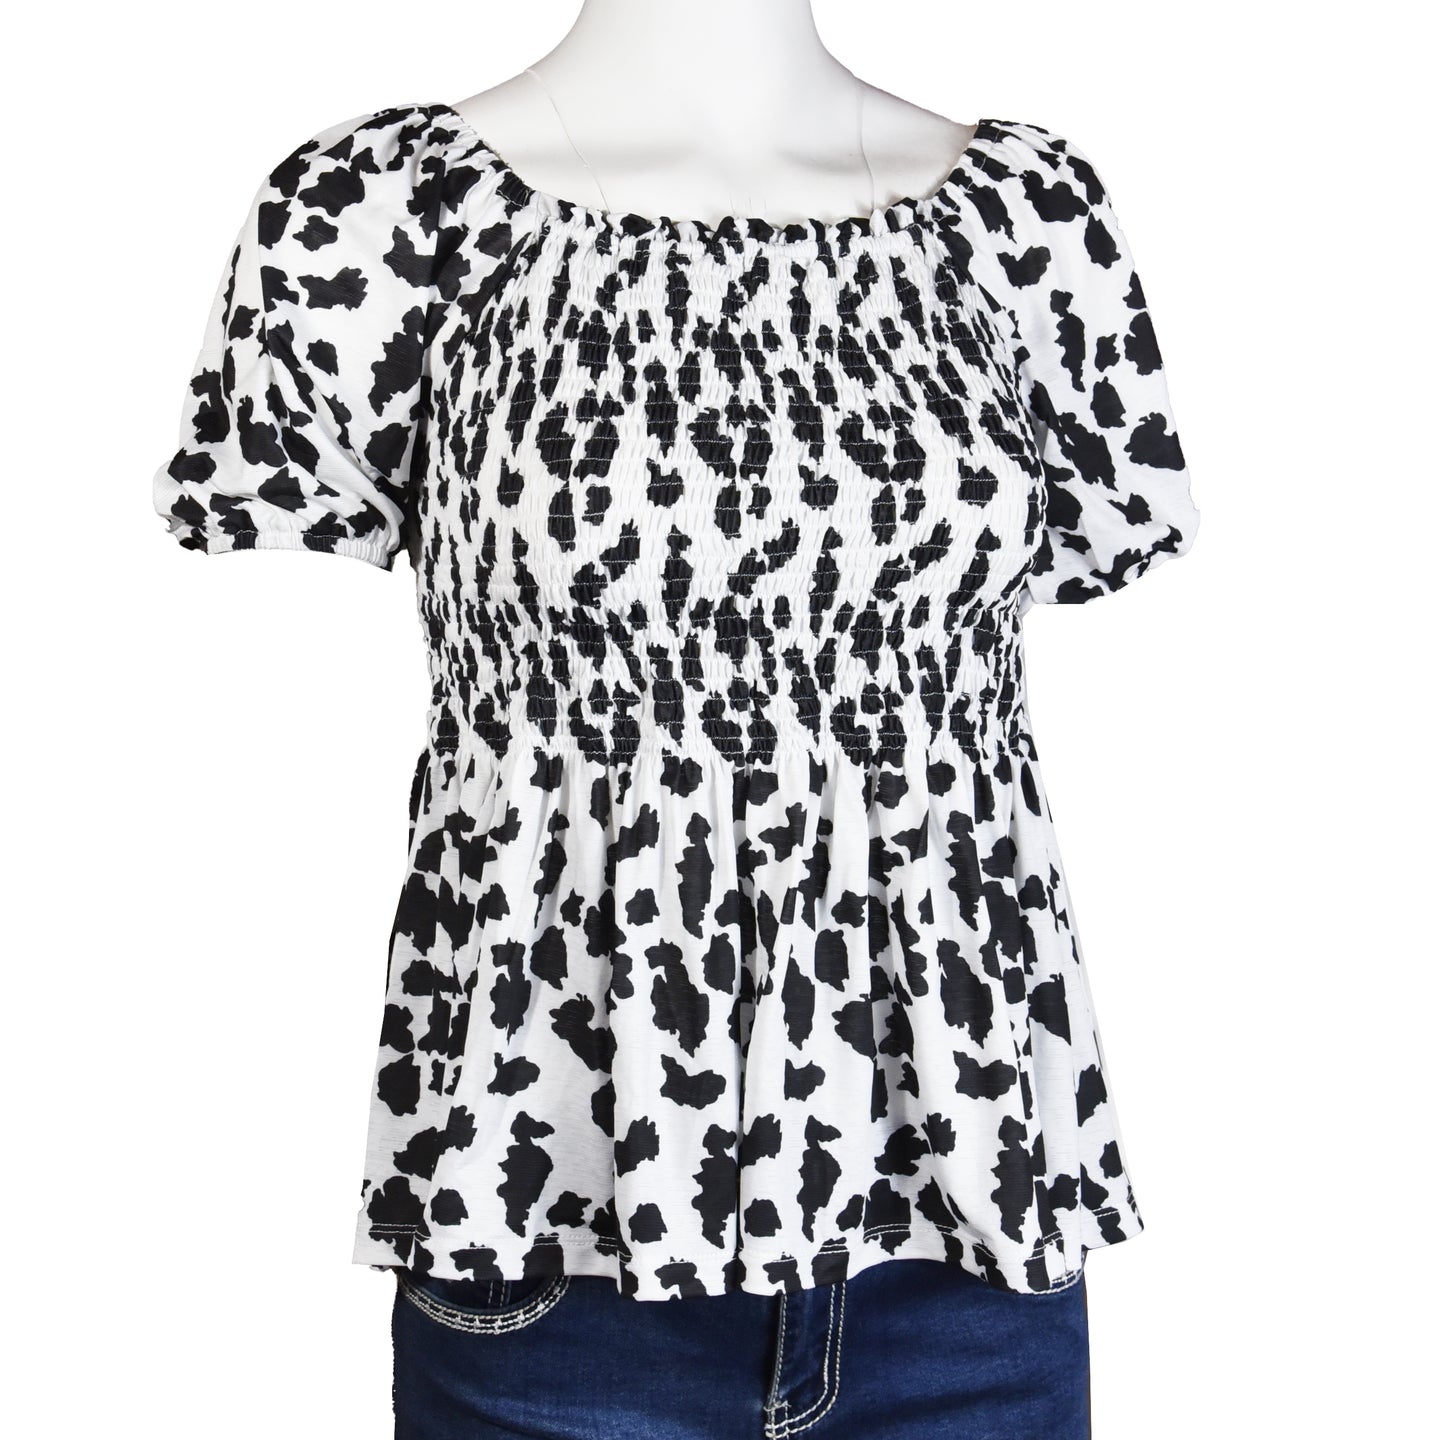 Cowgirl Hardware Cowprint Smock S/S Top 235783-010